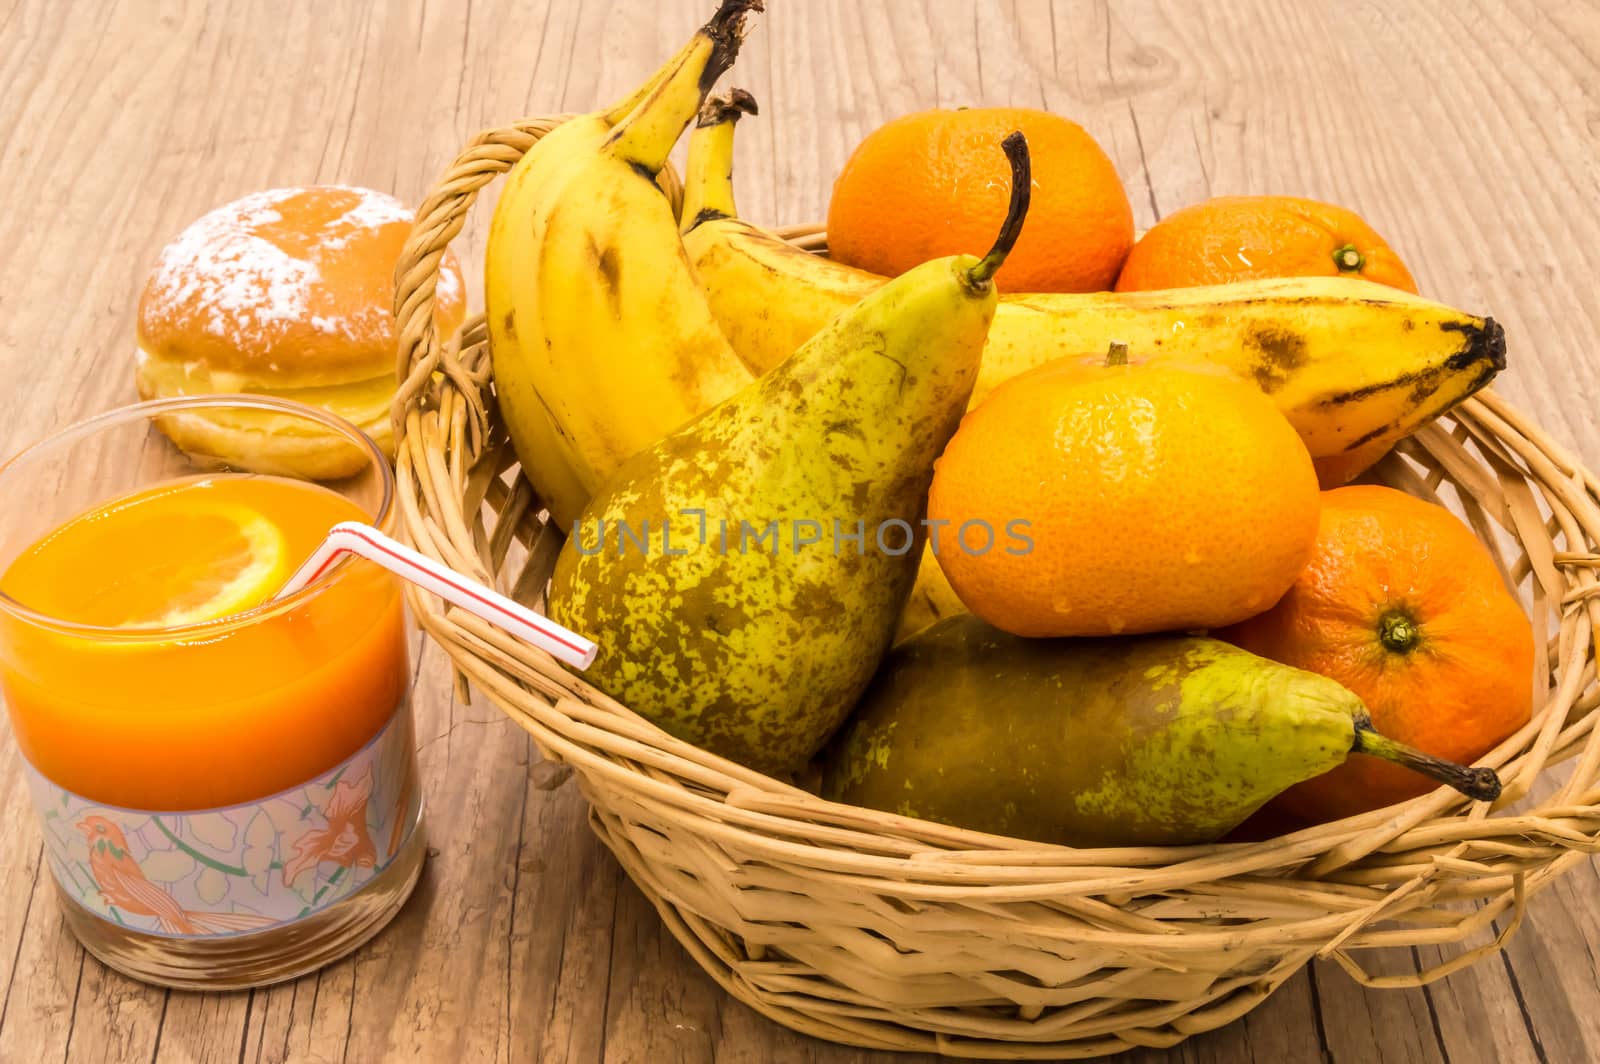 Healthy food. Organic fruits and vegetables with multifruit juice on a wooden background